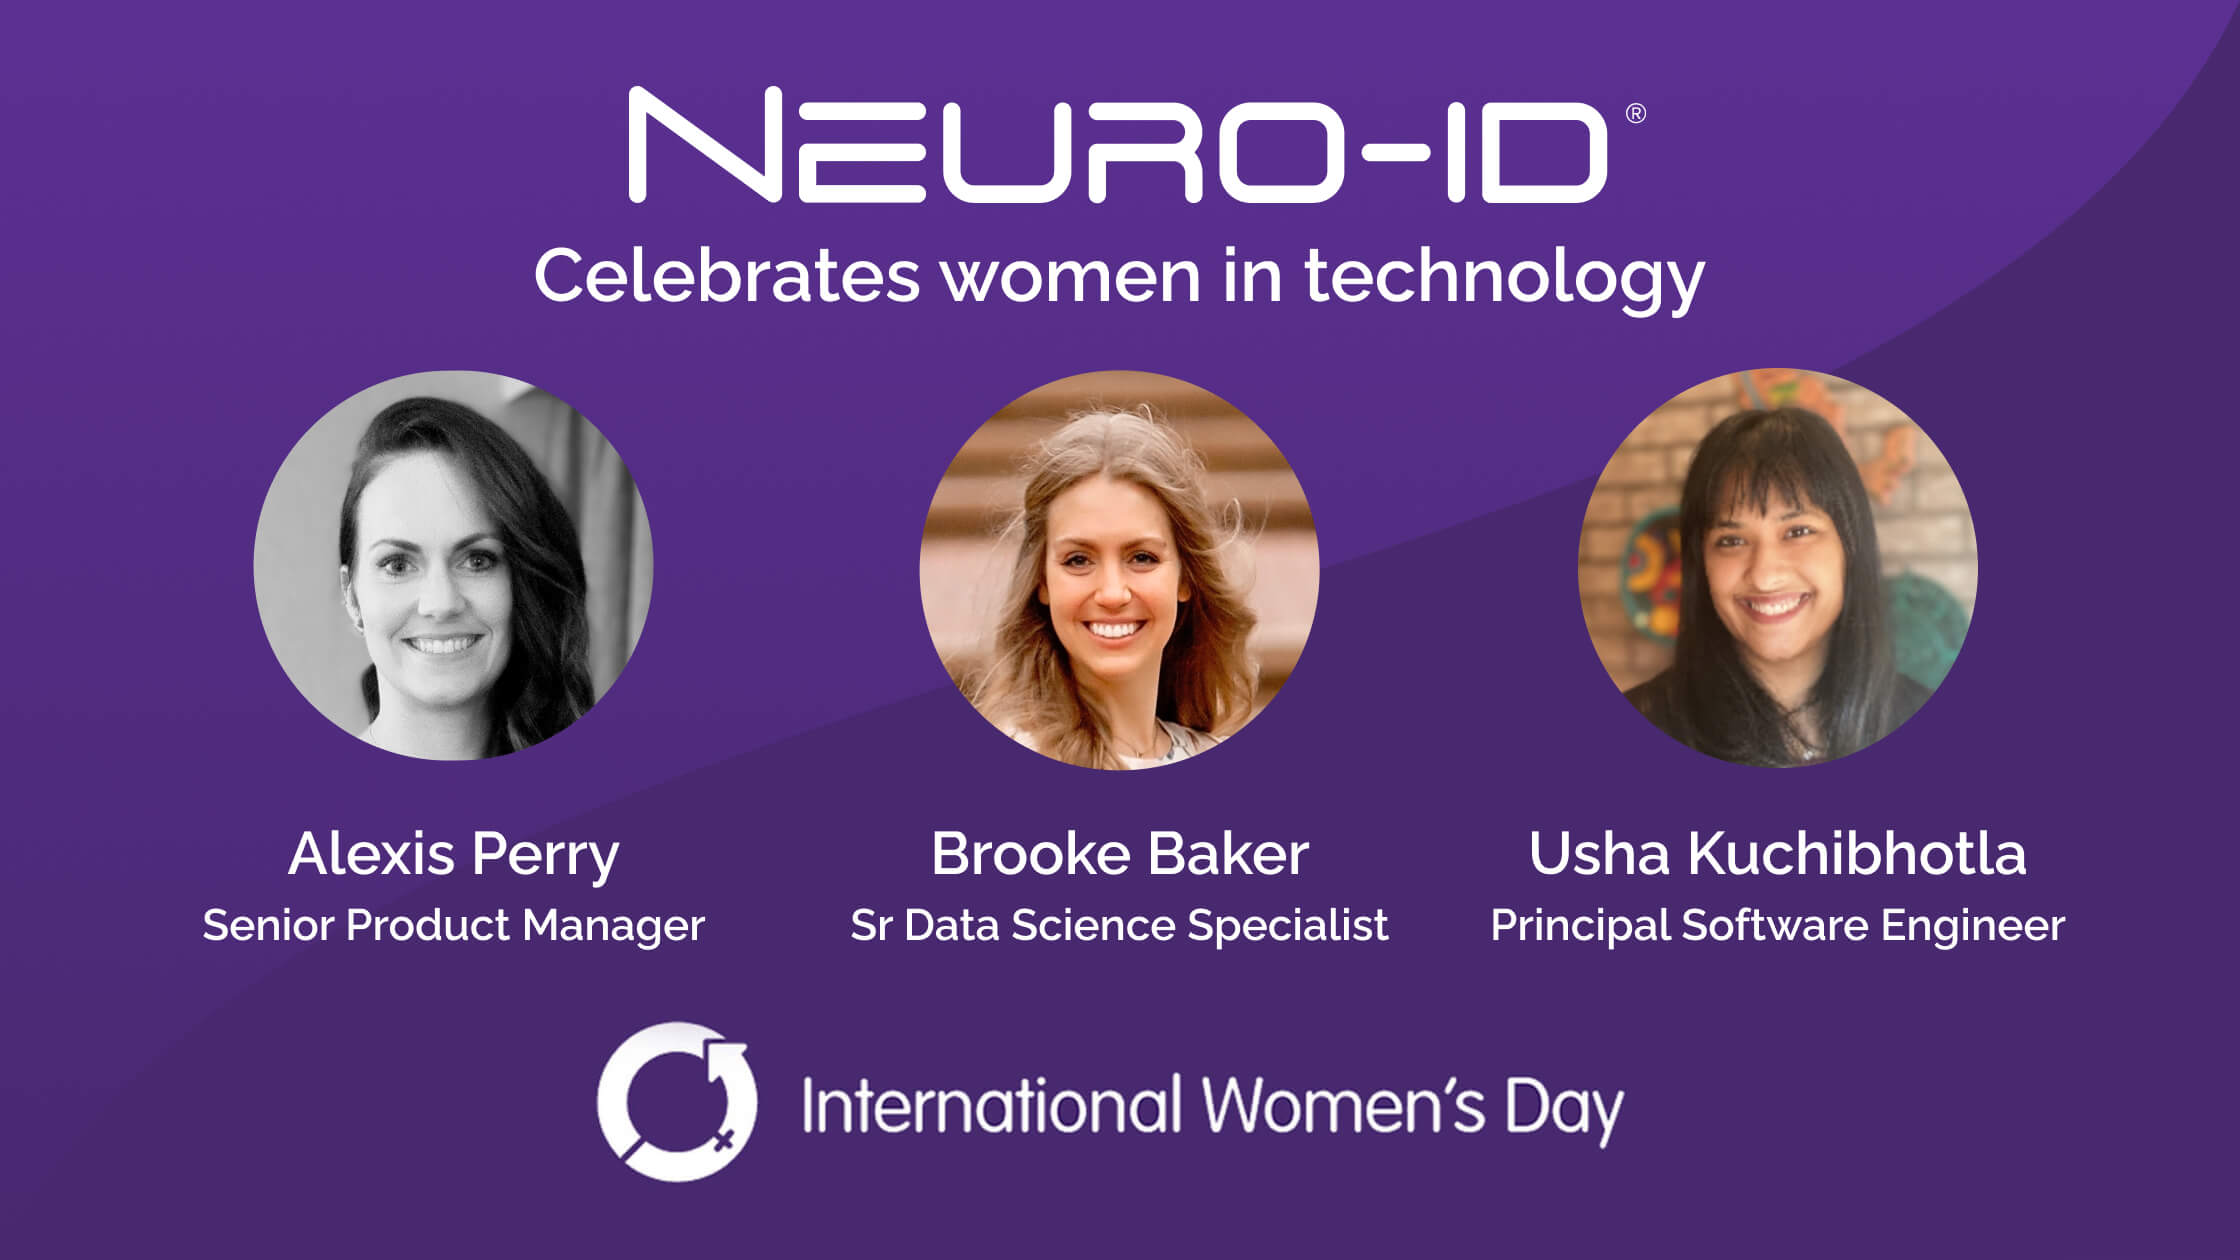 Q&A: 3 Neuro-ID Women in Tech Share Lessons on Careers, Biases, & Speed Bumps